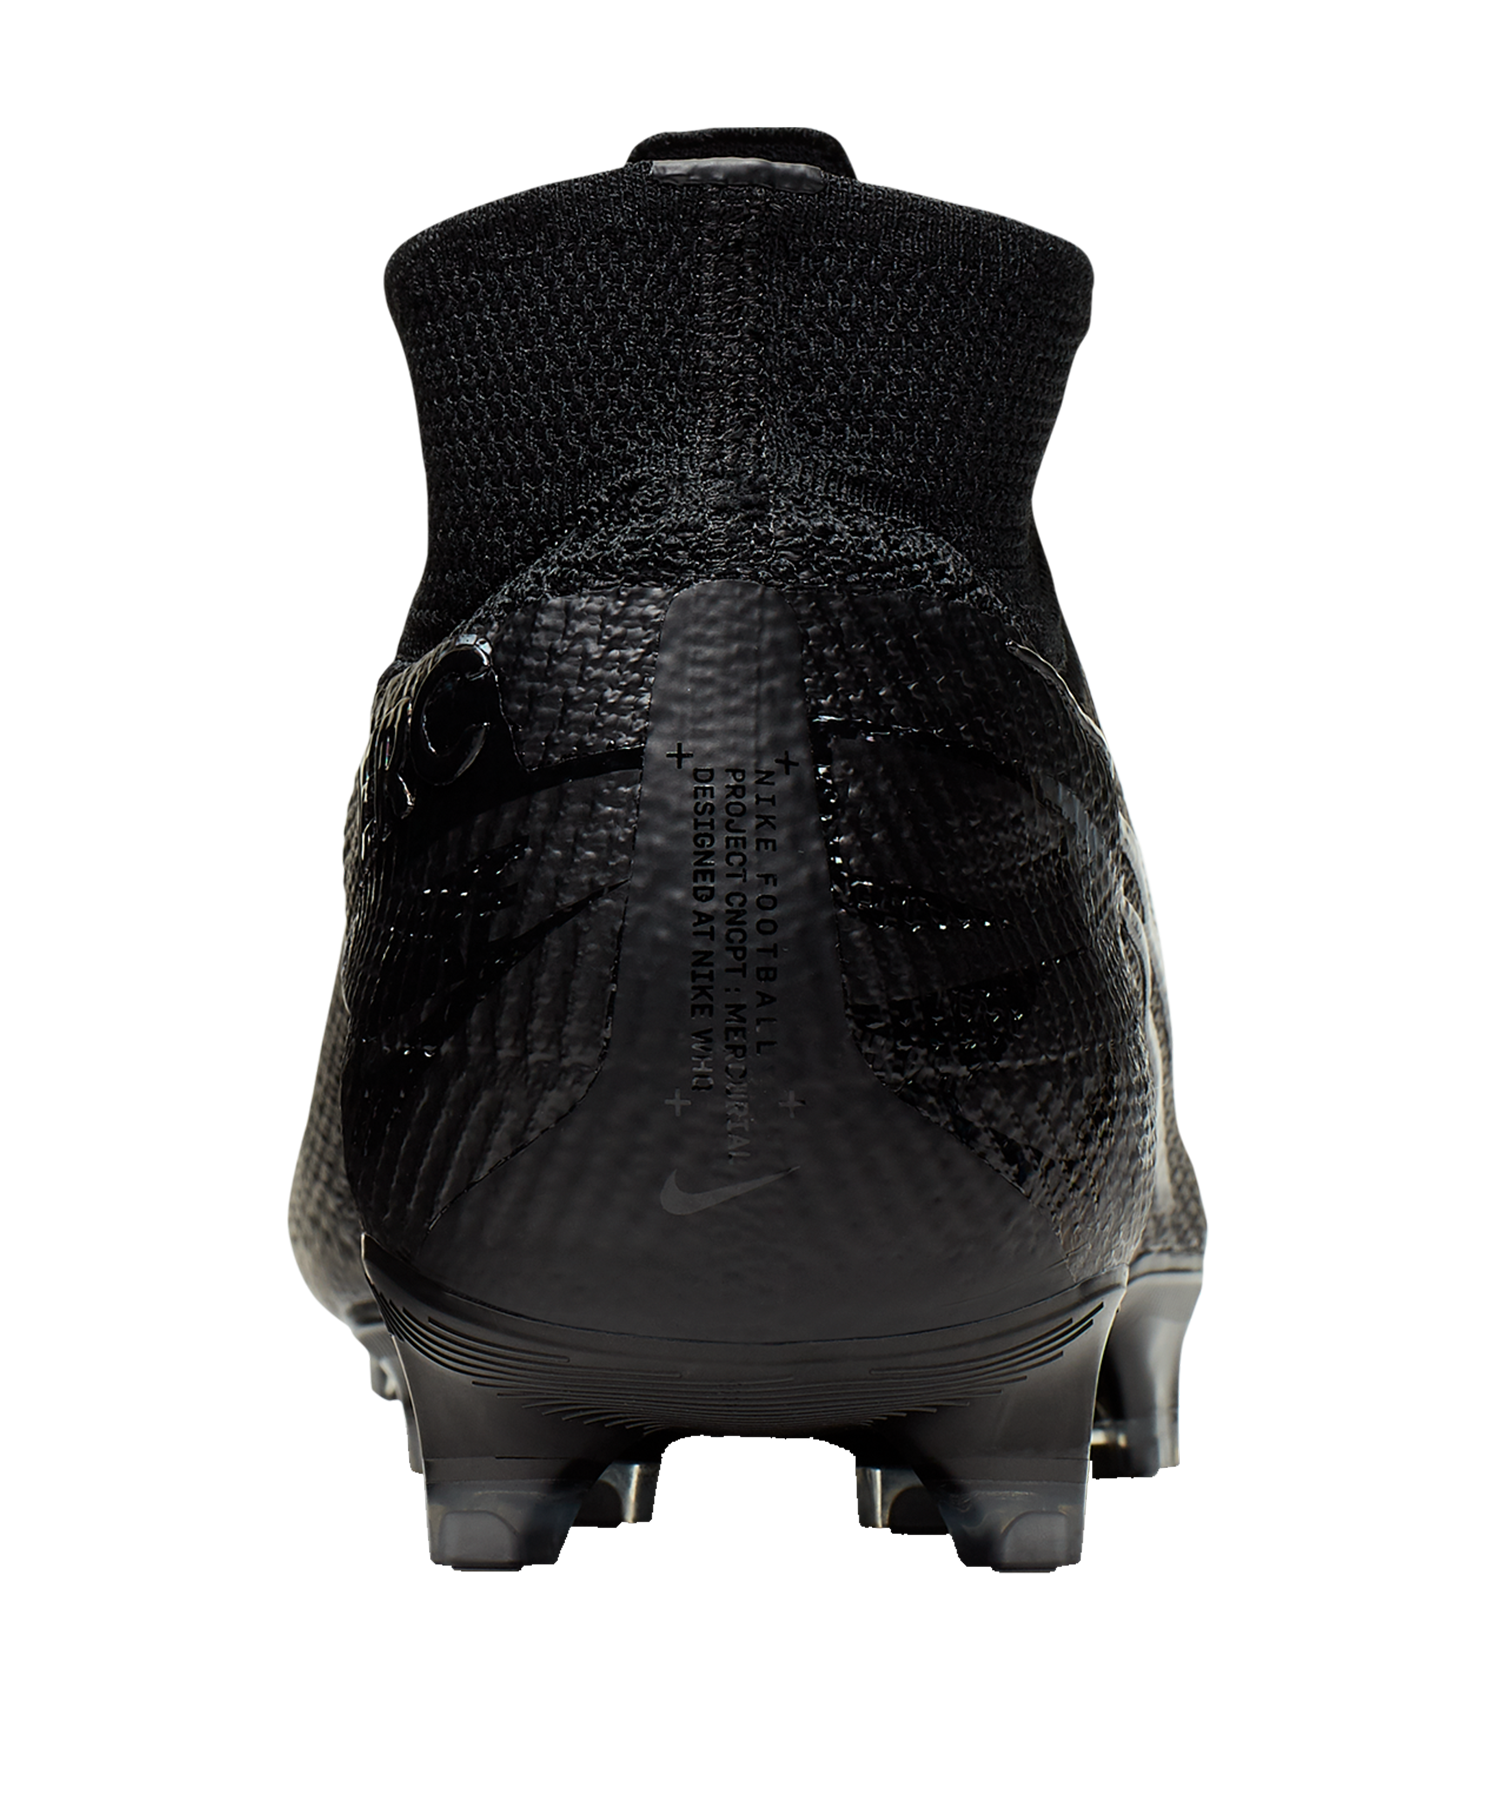 View All Nike Mercurial Superfly VI Game Over Elite IC.